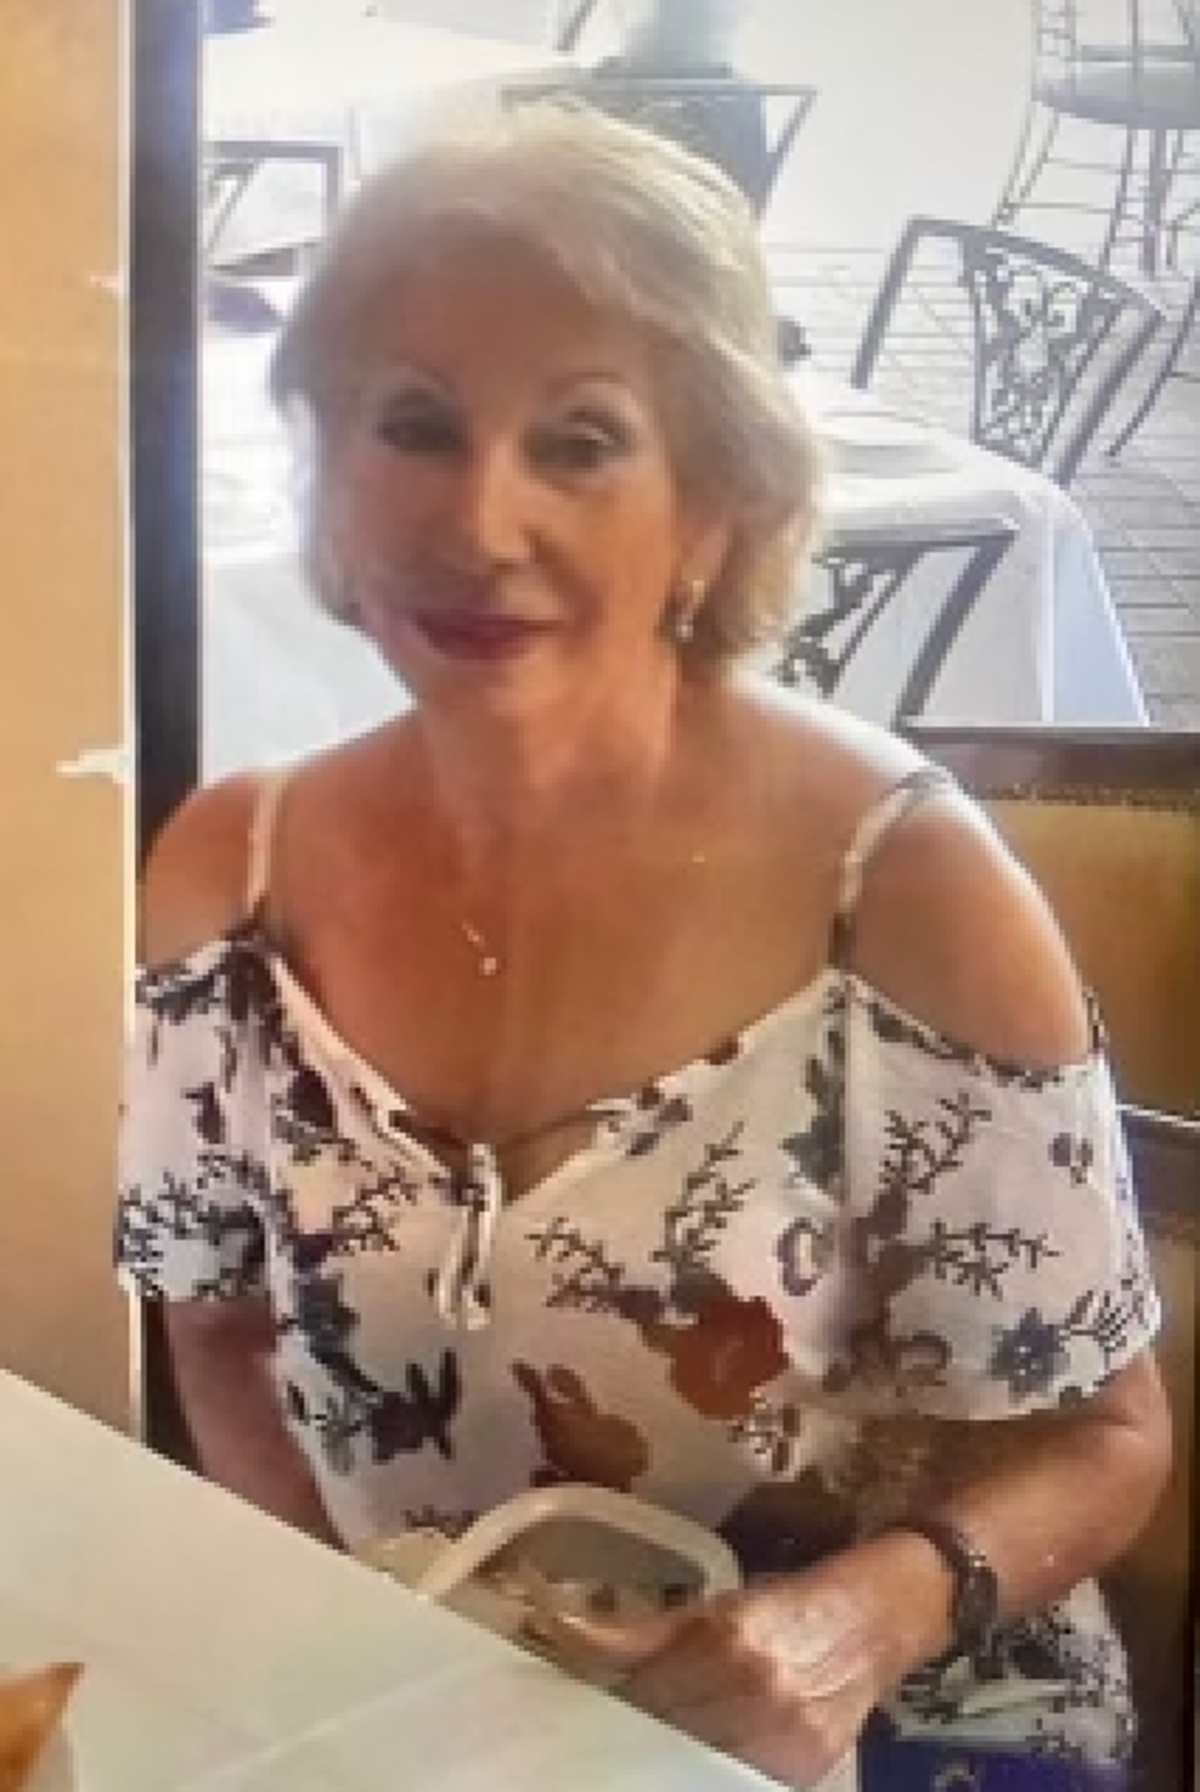 Remains stuffed in suitcases discovered on 21 July were identified as 80-year-old Aydil Barbosa Fontes (Delray Beach Police Department)